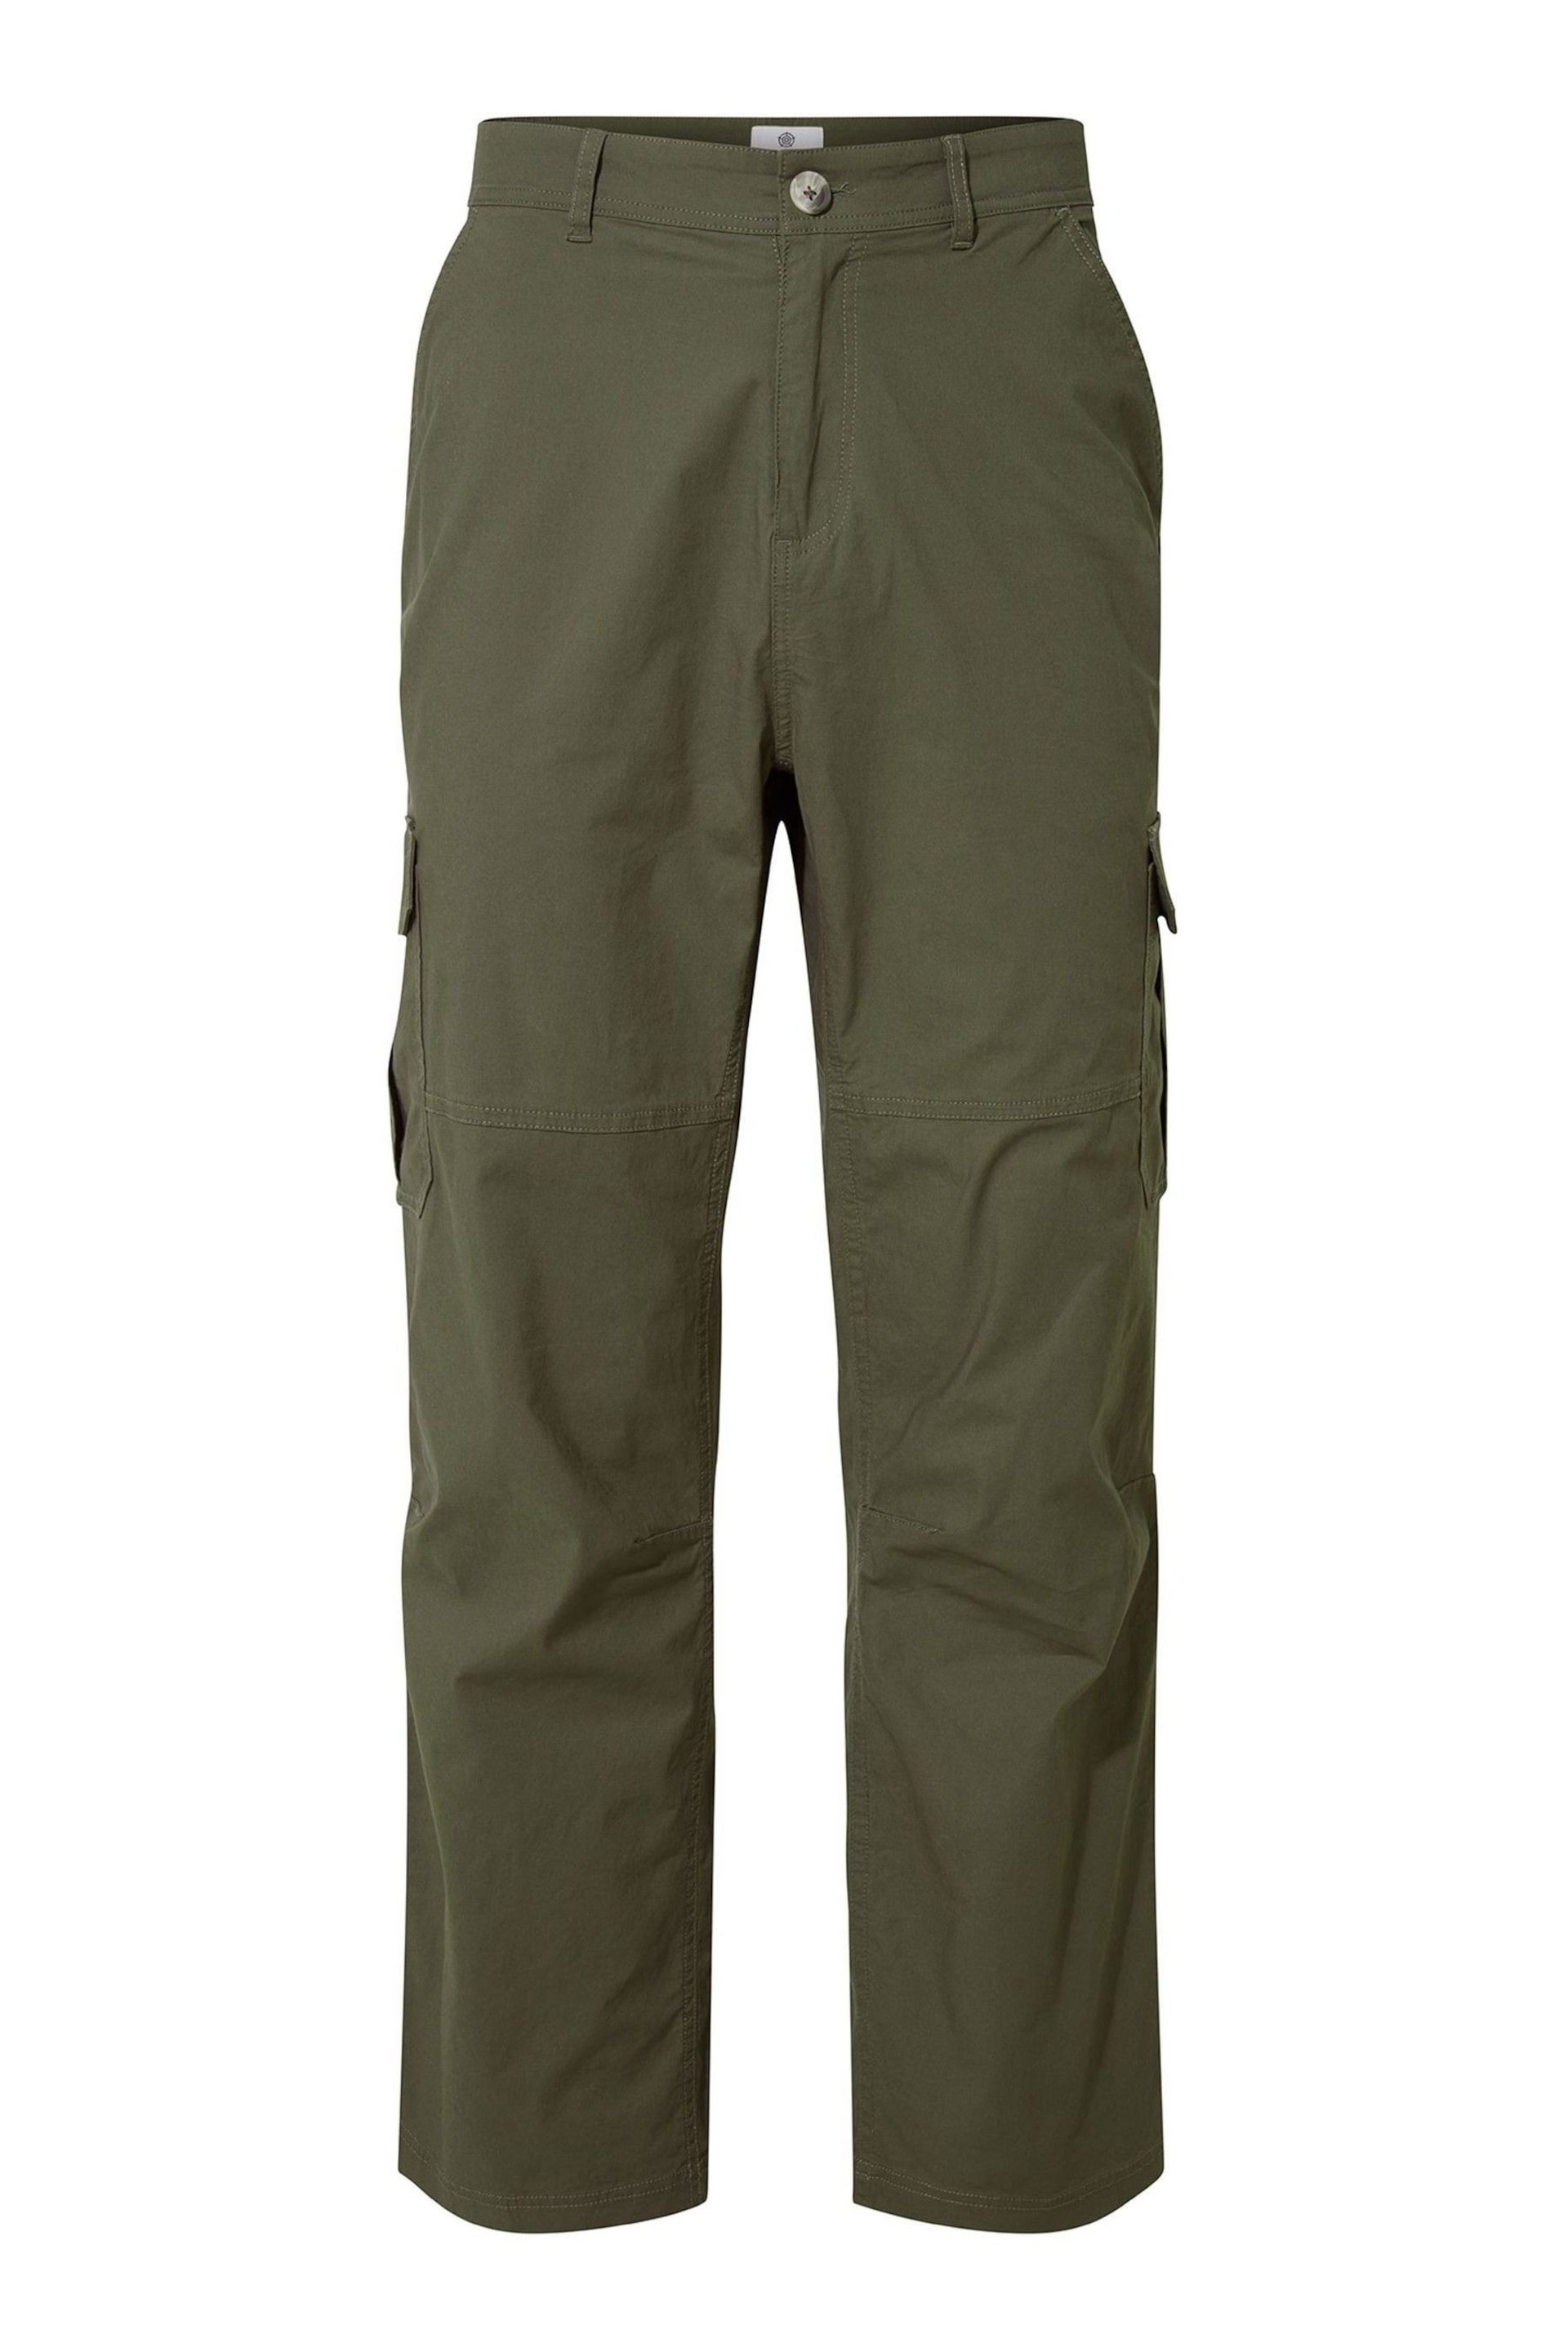 Tog 24 Green Dibden Cargo Trousers - Image 6 of 8